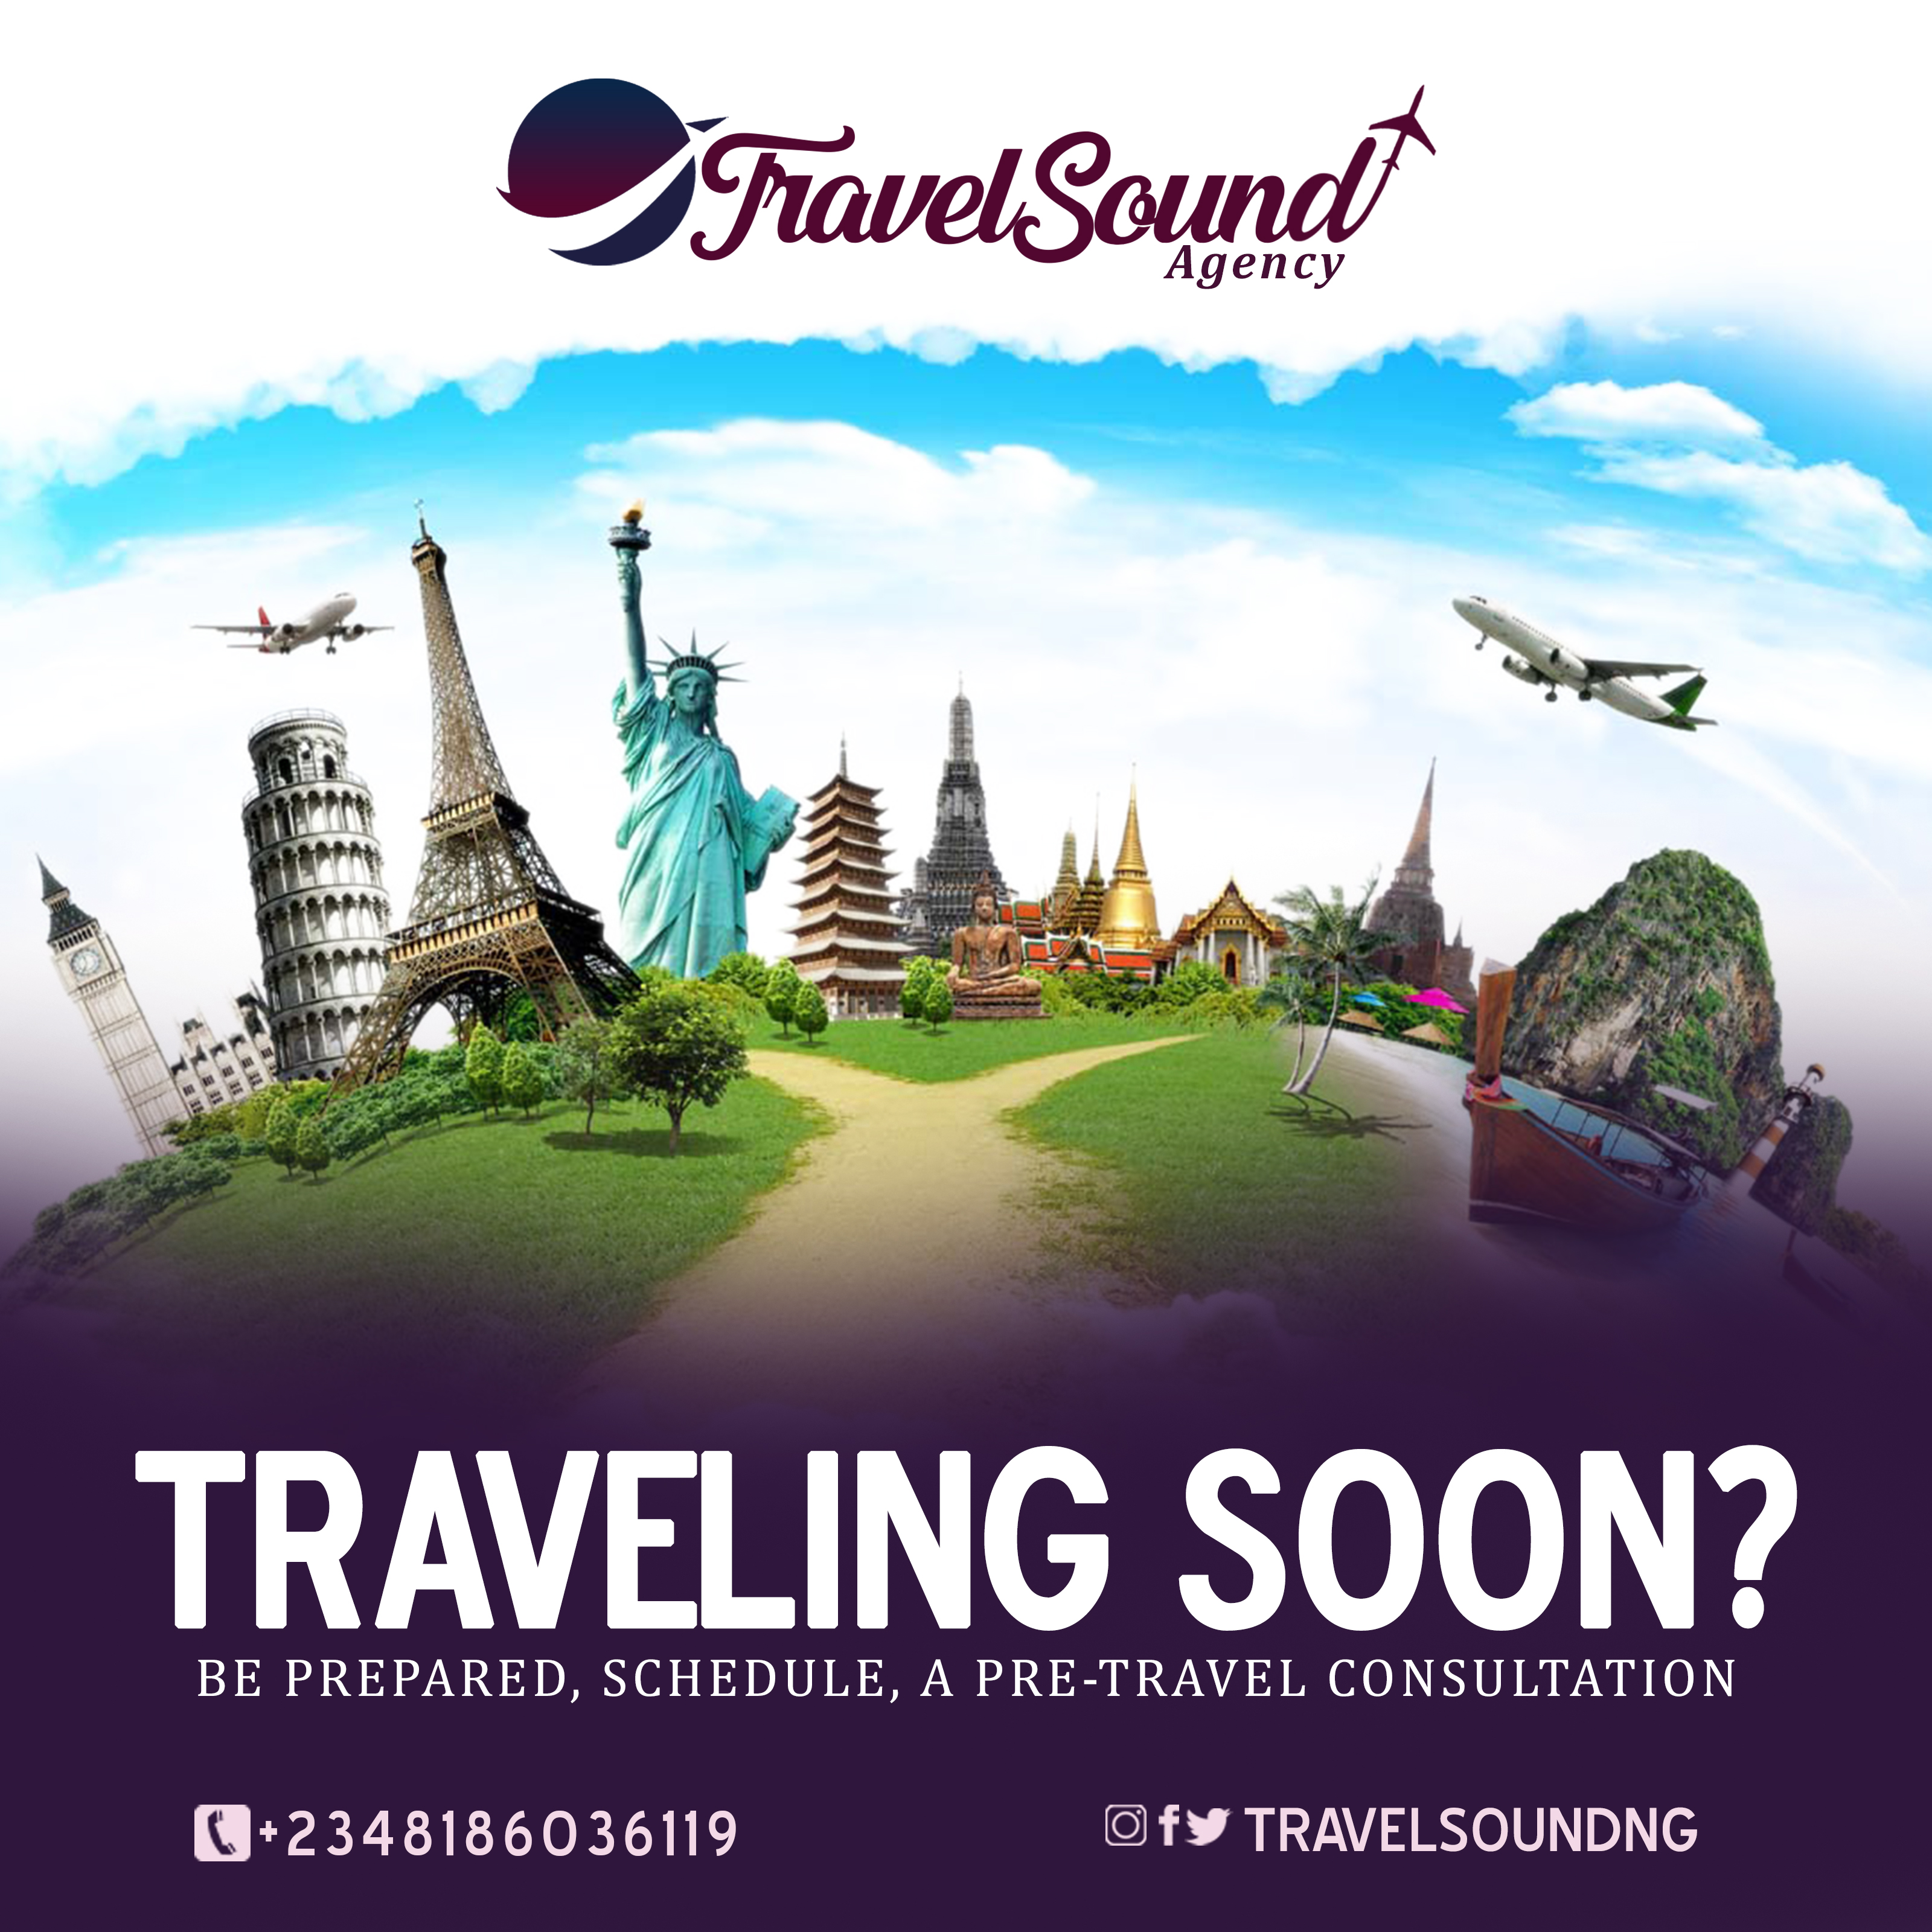 travelsound agency. Traveling soon within Nigeria, Africa or Europe contact us today 